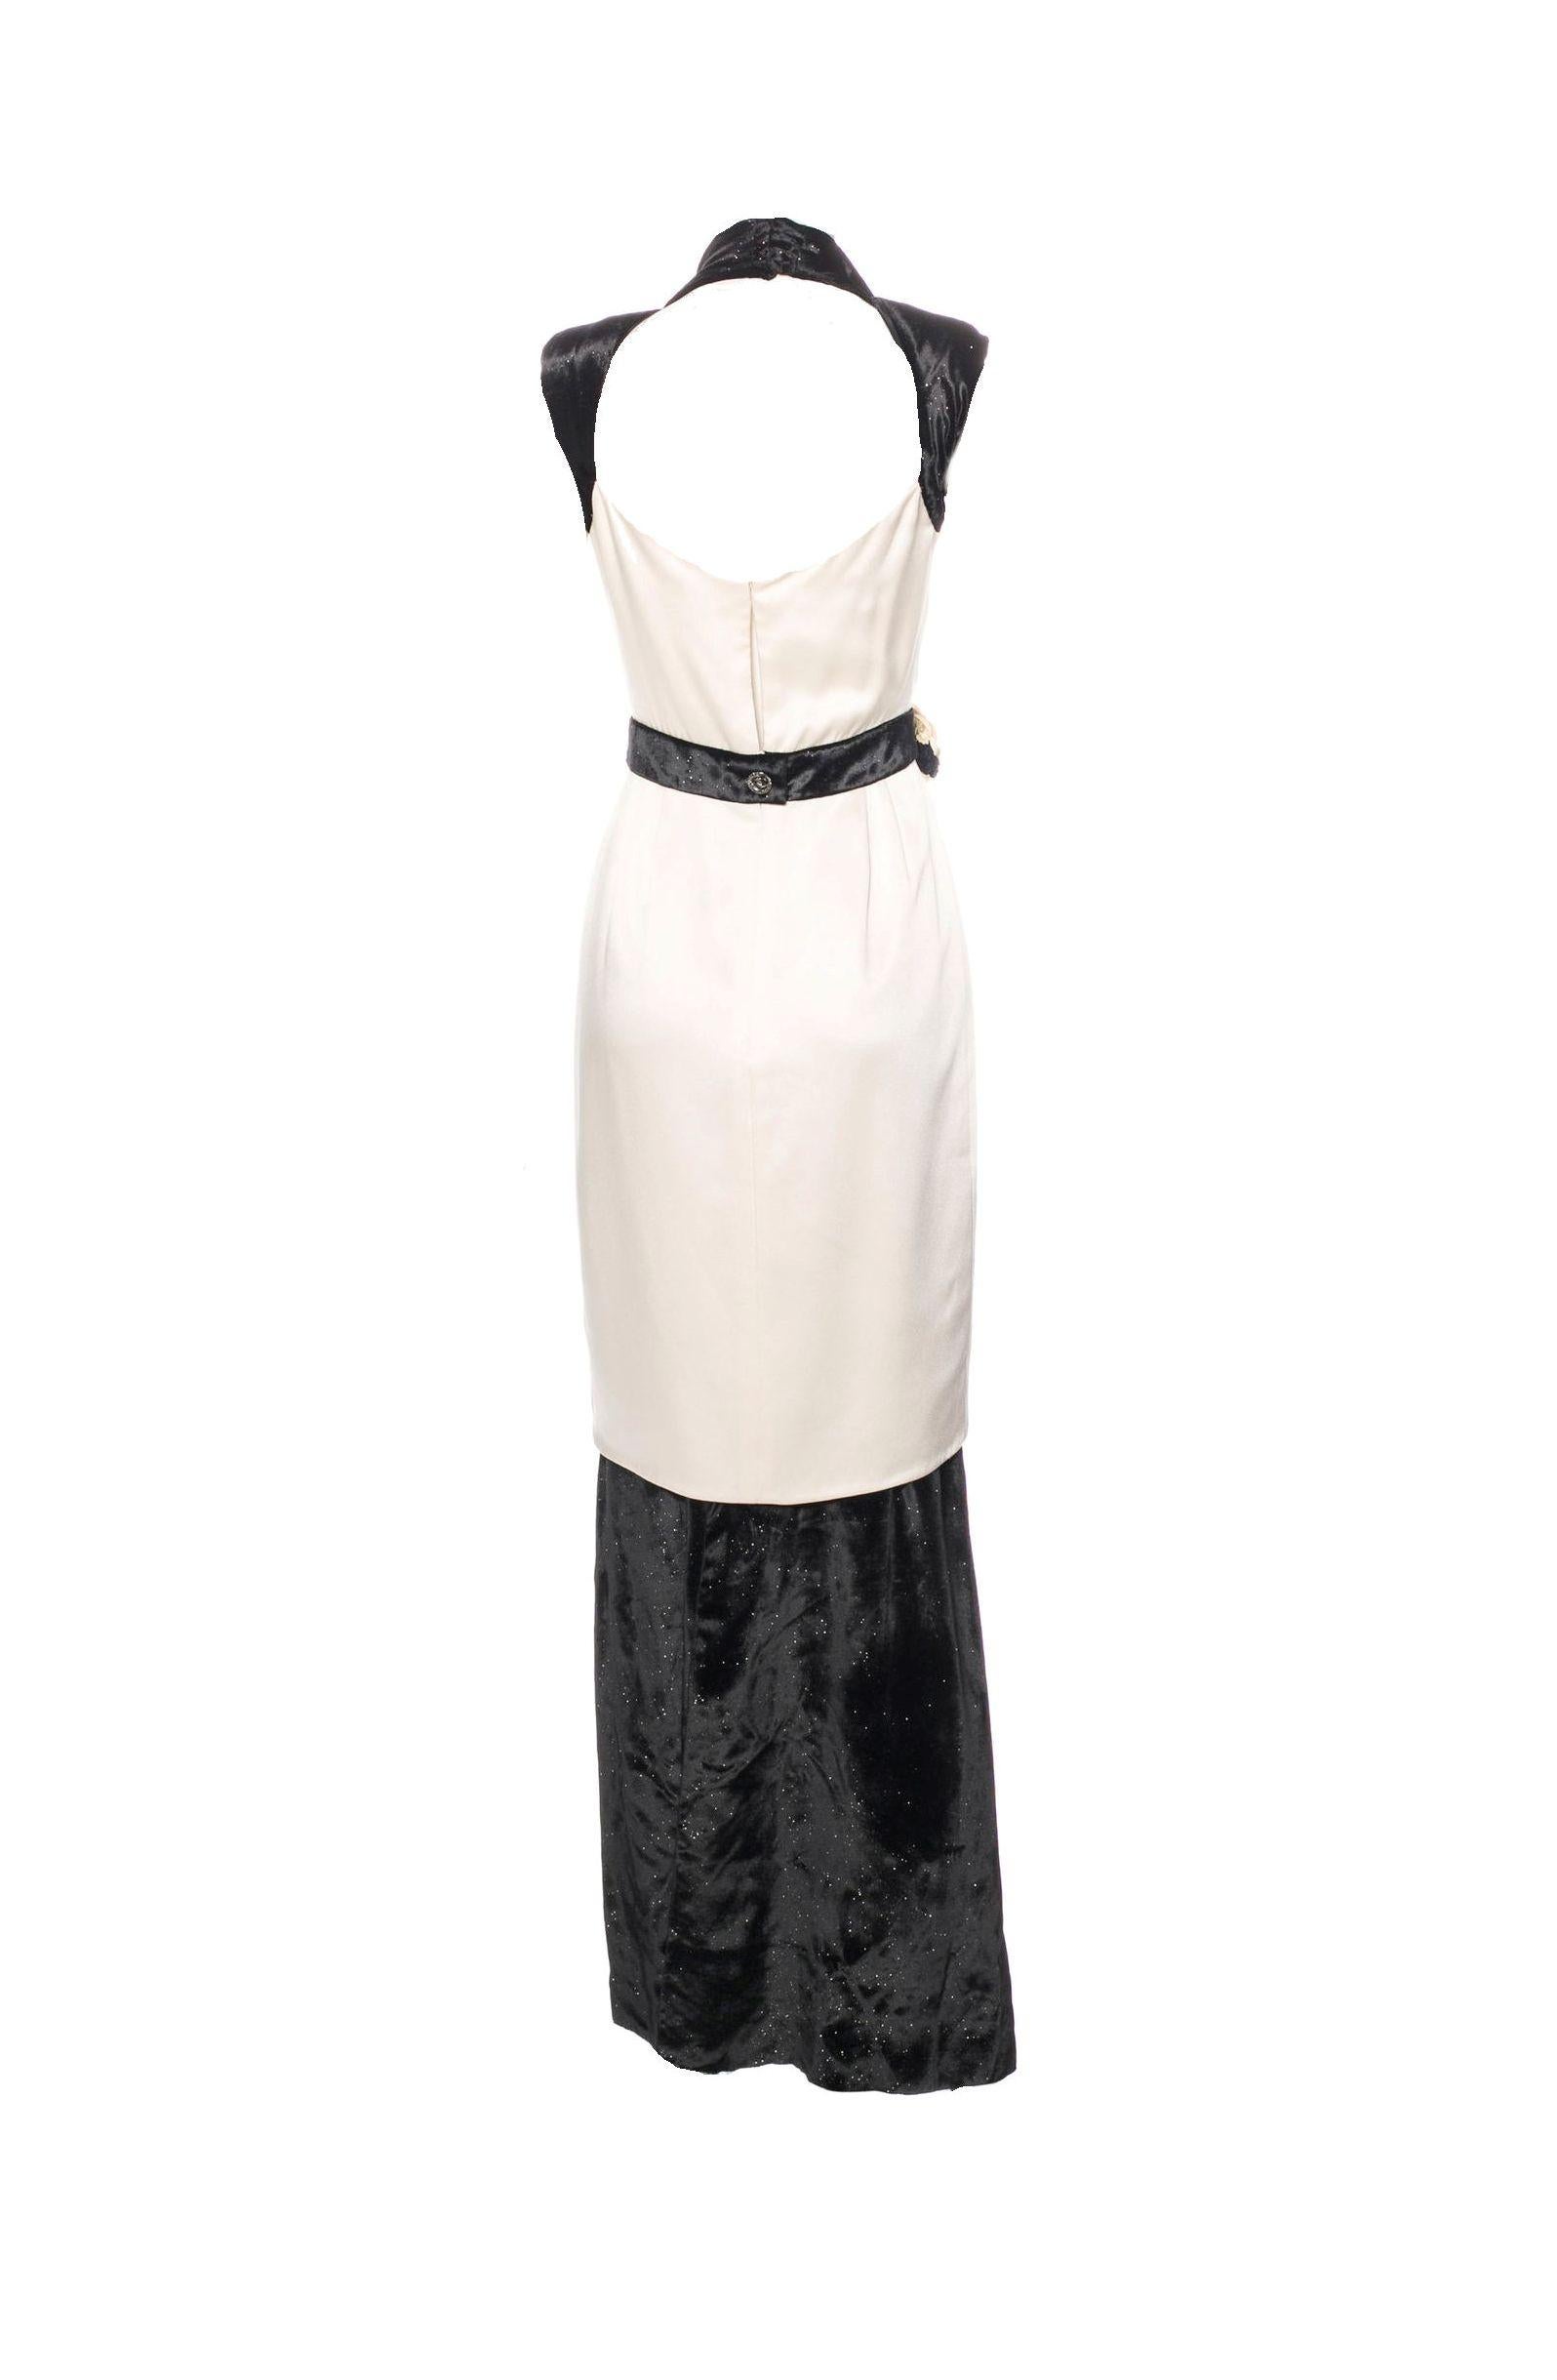 Stunning CHANEL evening gown
Important and documented piece - almost like Haute Couture!
From a Chanel for a Metiers d'Art collection
Amazing ensemble consisting of a long black silk & velvet unhemmed underskirt 
Shorter Dress on top of it in cream